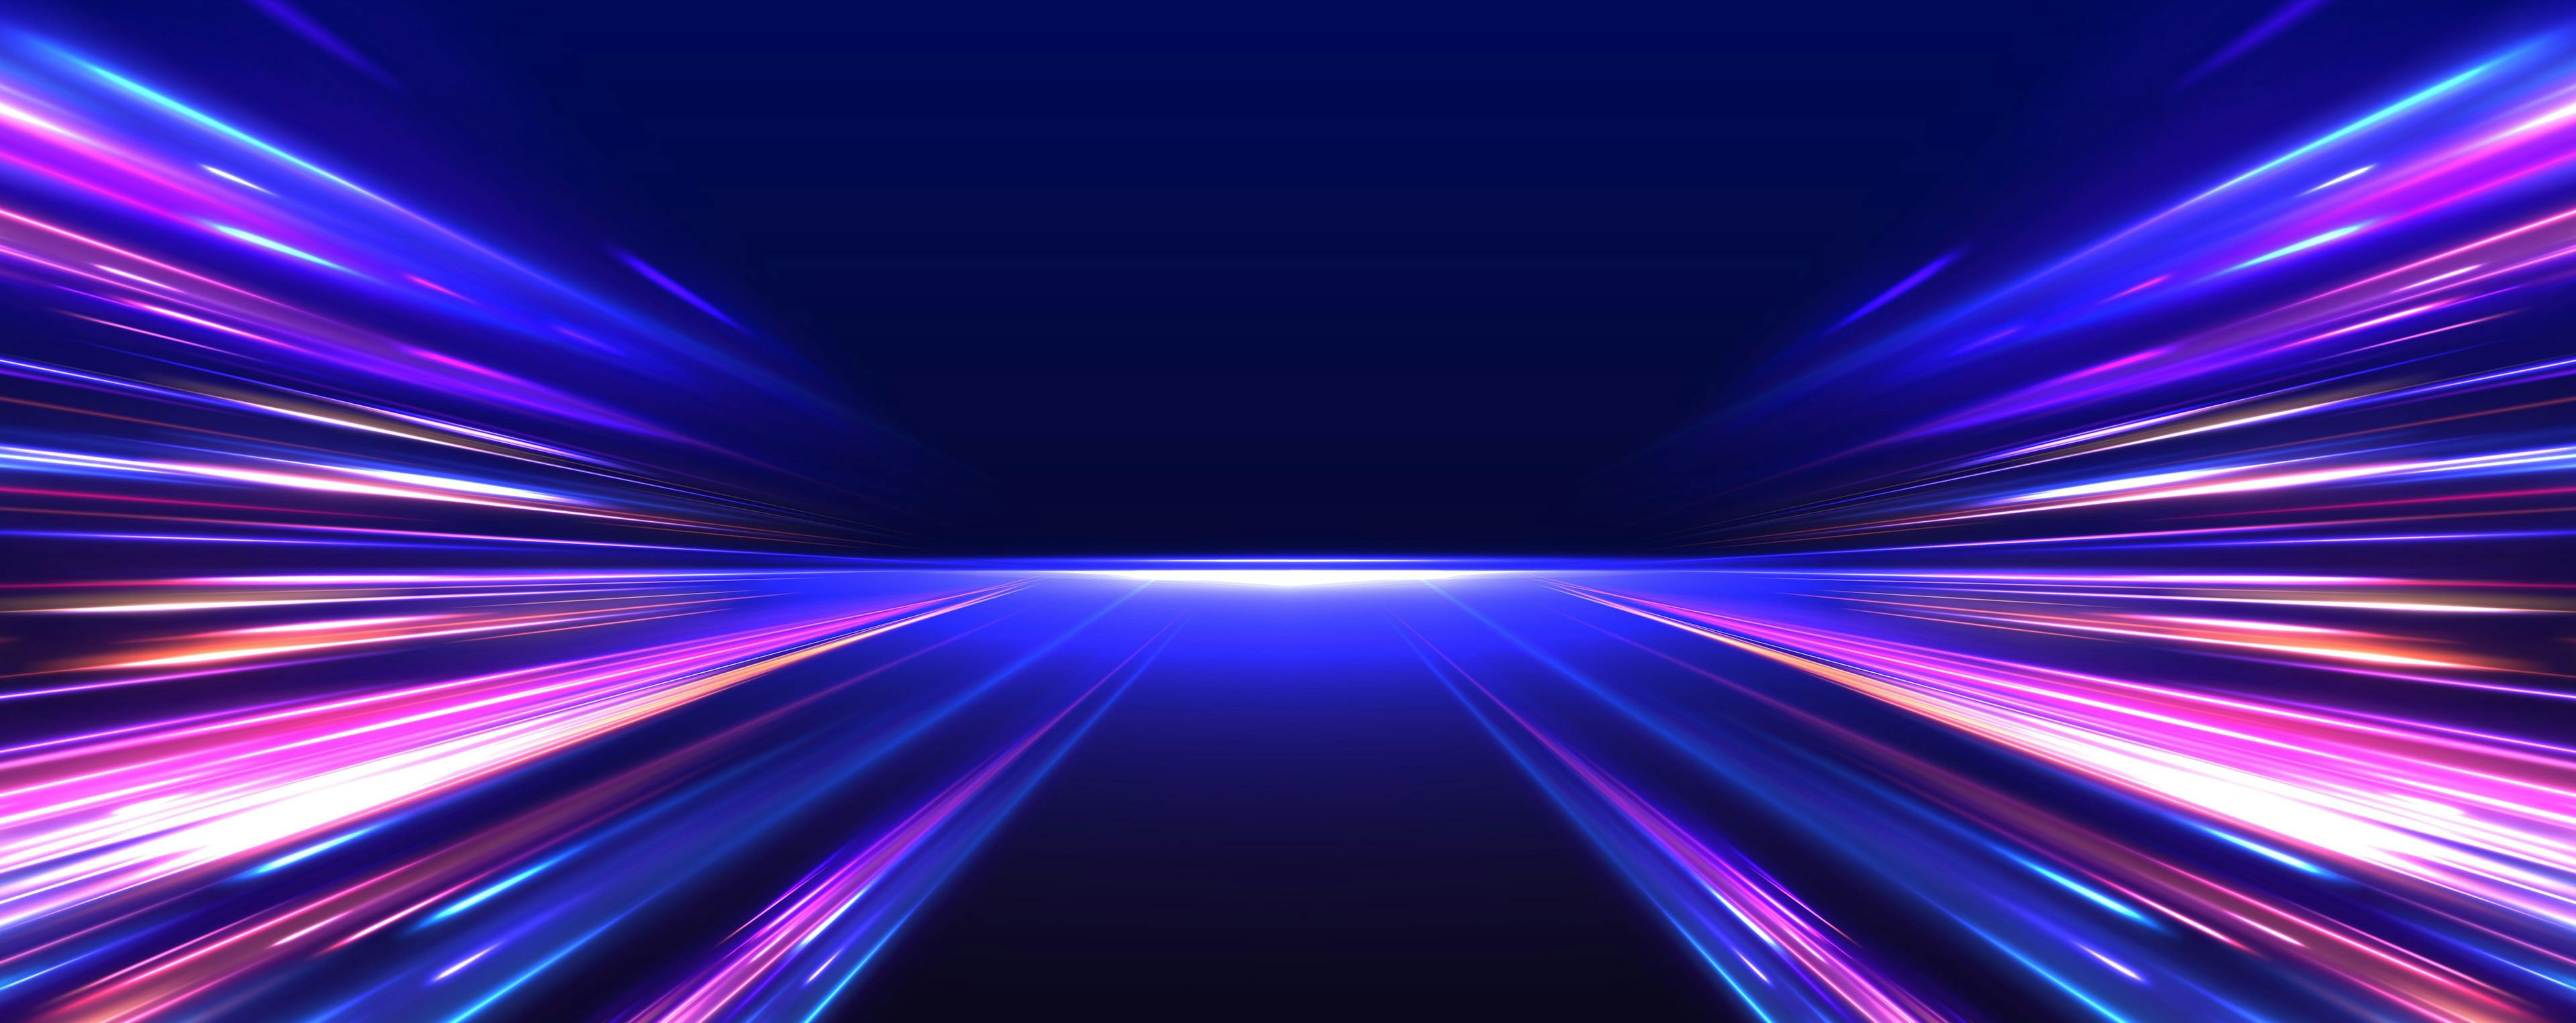 Vector glitter light fire flare trace. Abstract image of speed motion on the road. Dark blue abstract background with ultraviolet neon glow, blurry light lines, waves | Image Credit: © ikril - stock.adobe.com